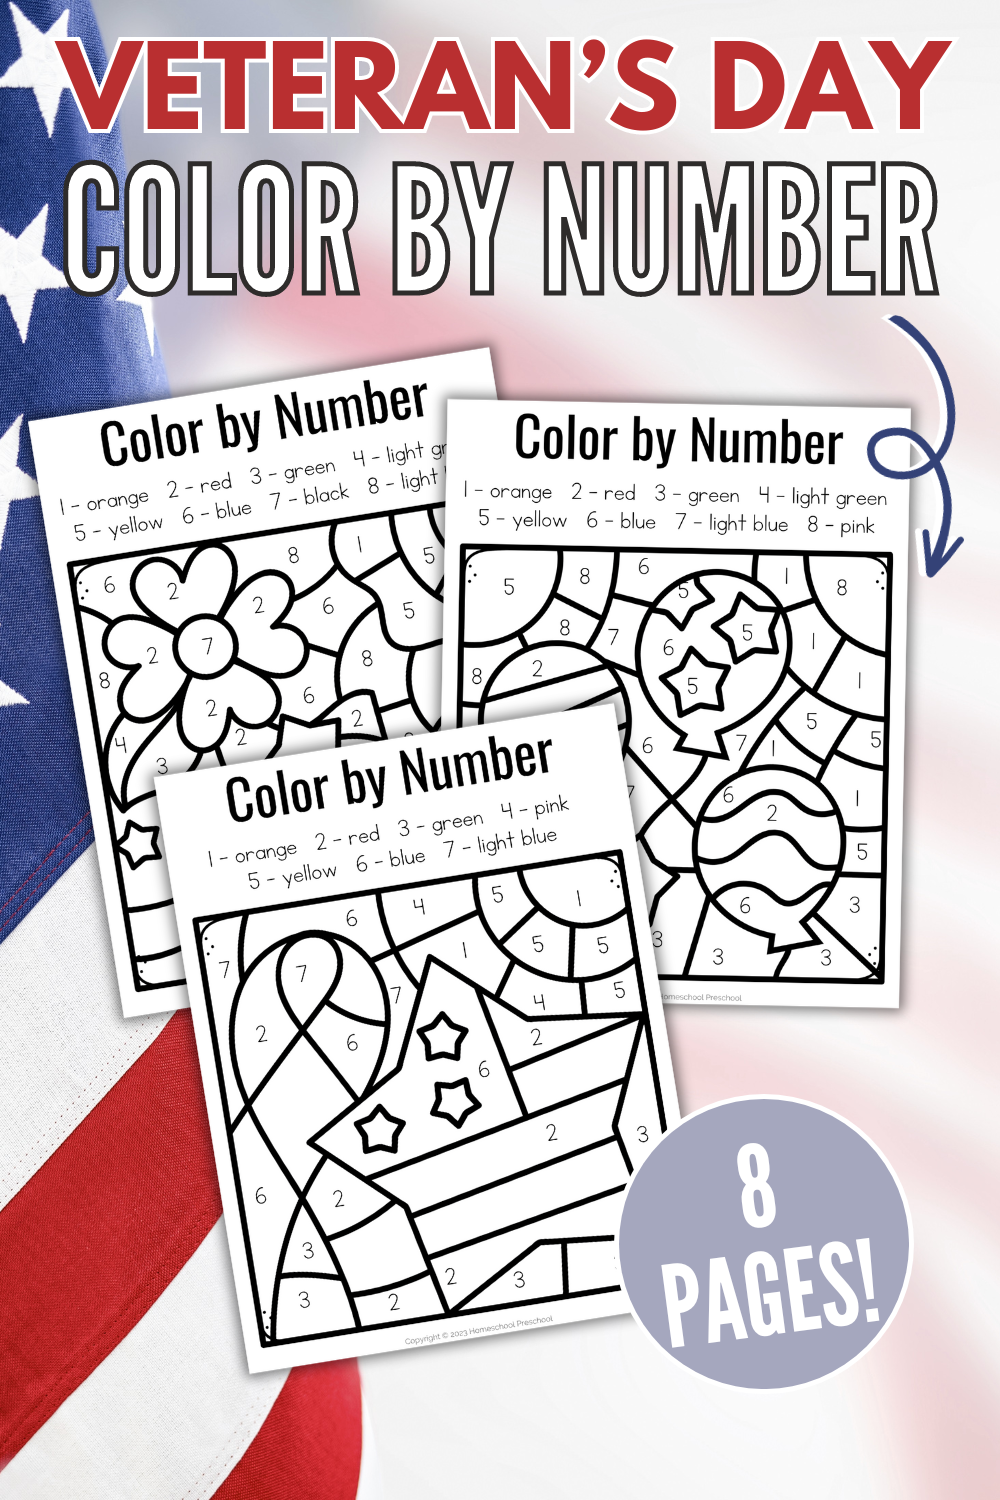 veterans-day-student-activities Veteran's Day Color by Number